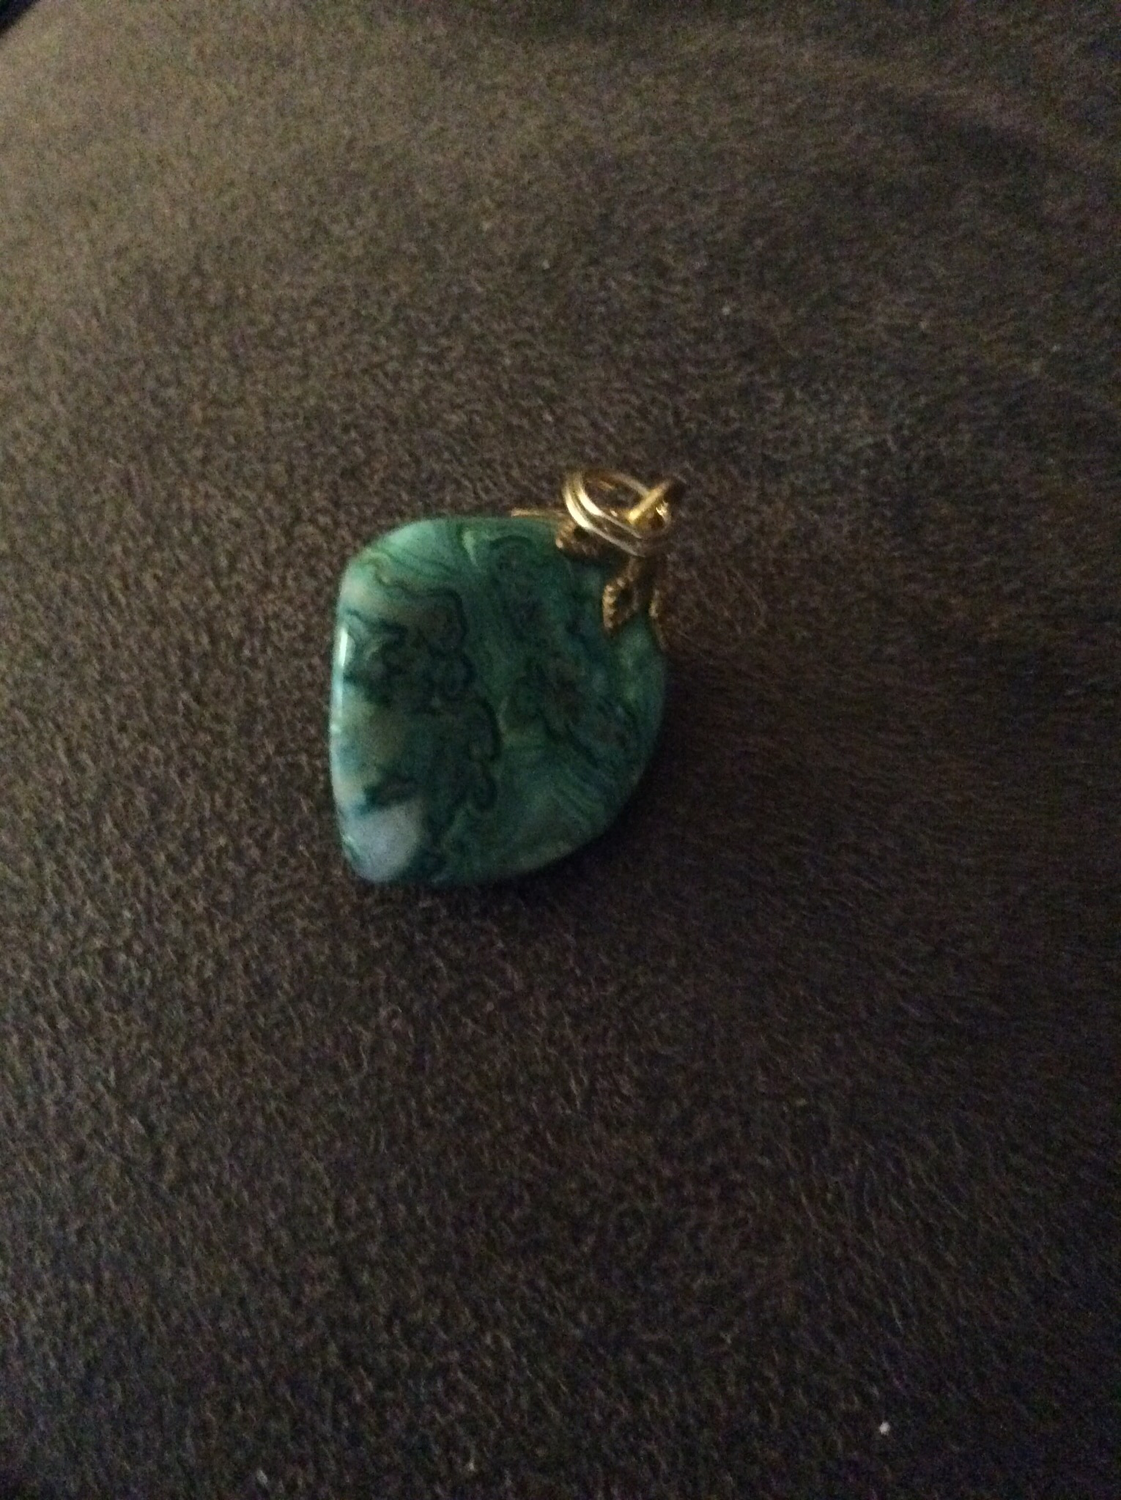 Small stone amulet anointing to hear the voice of the Divine 